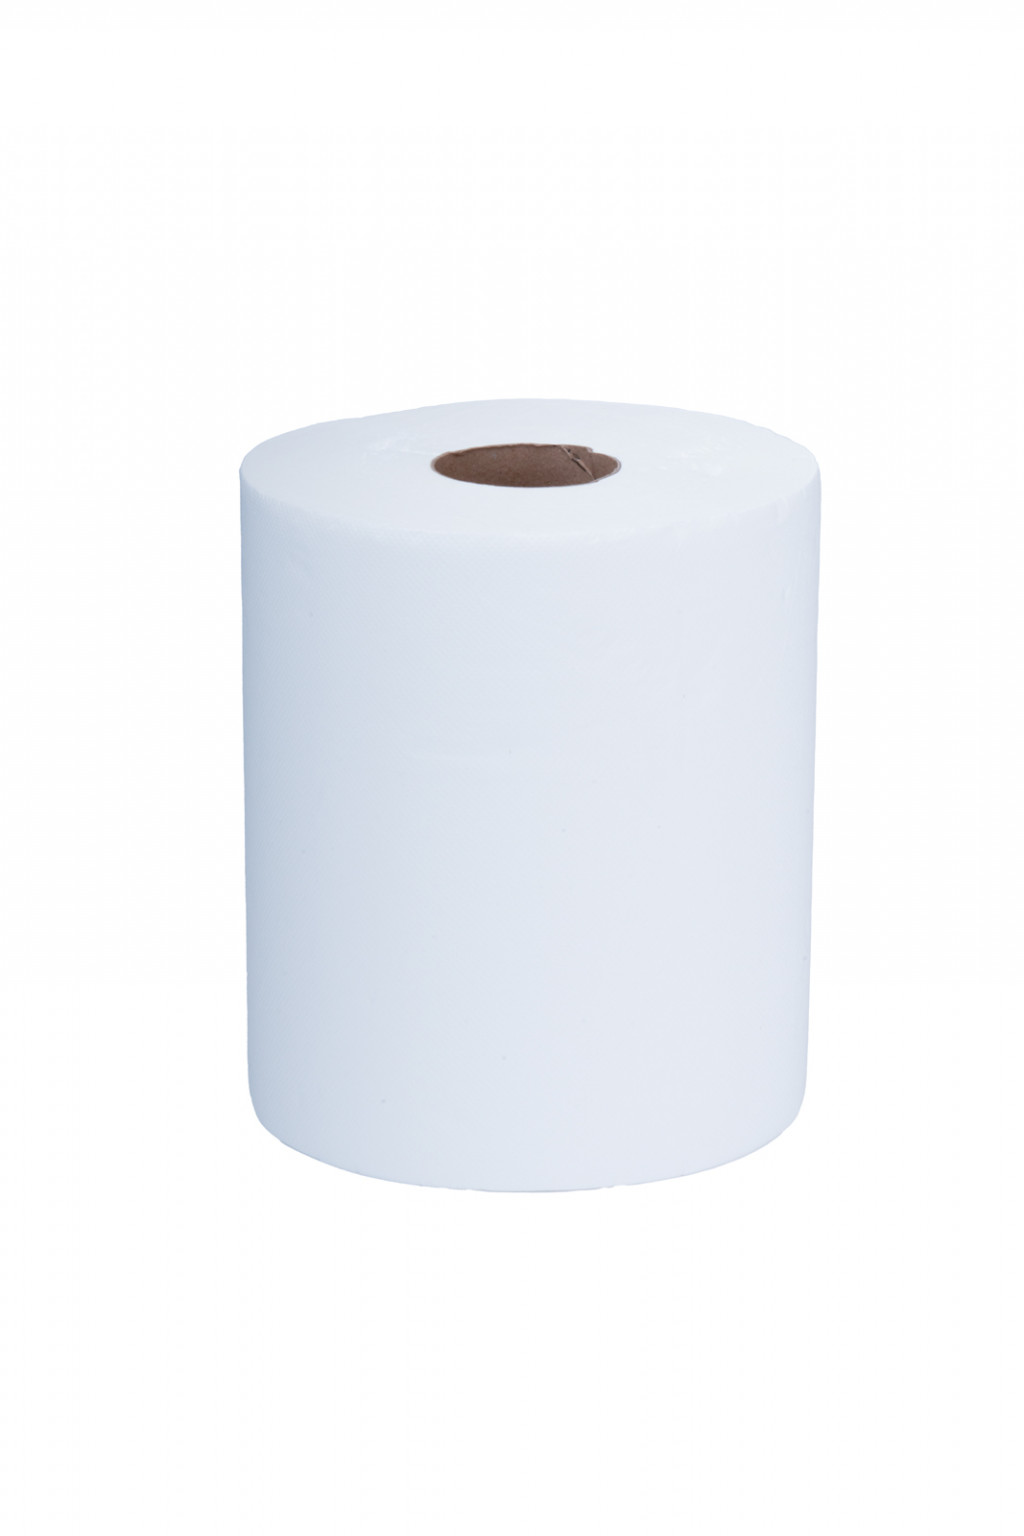 White cleaning rolls